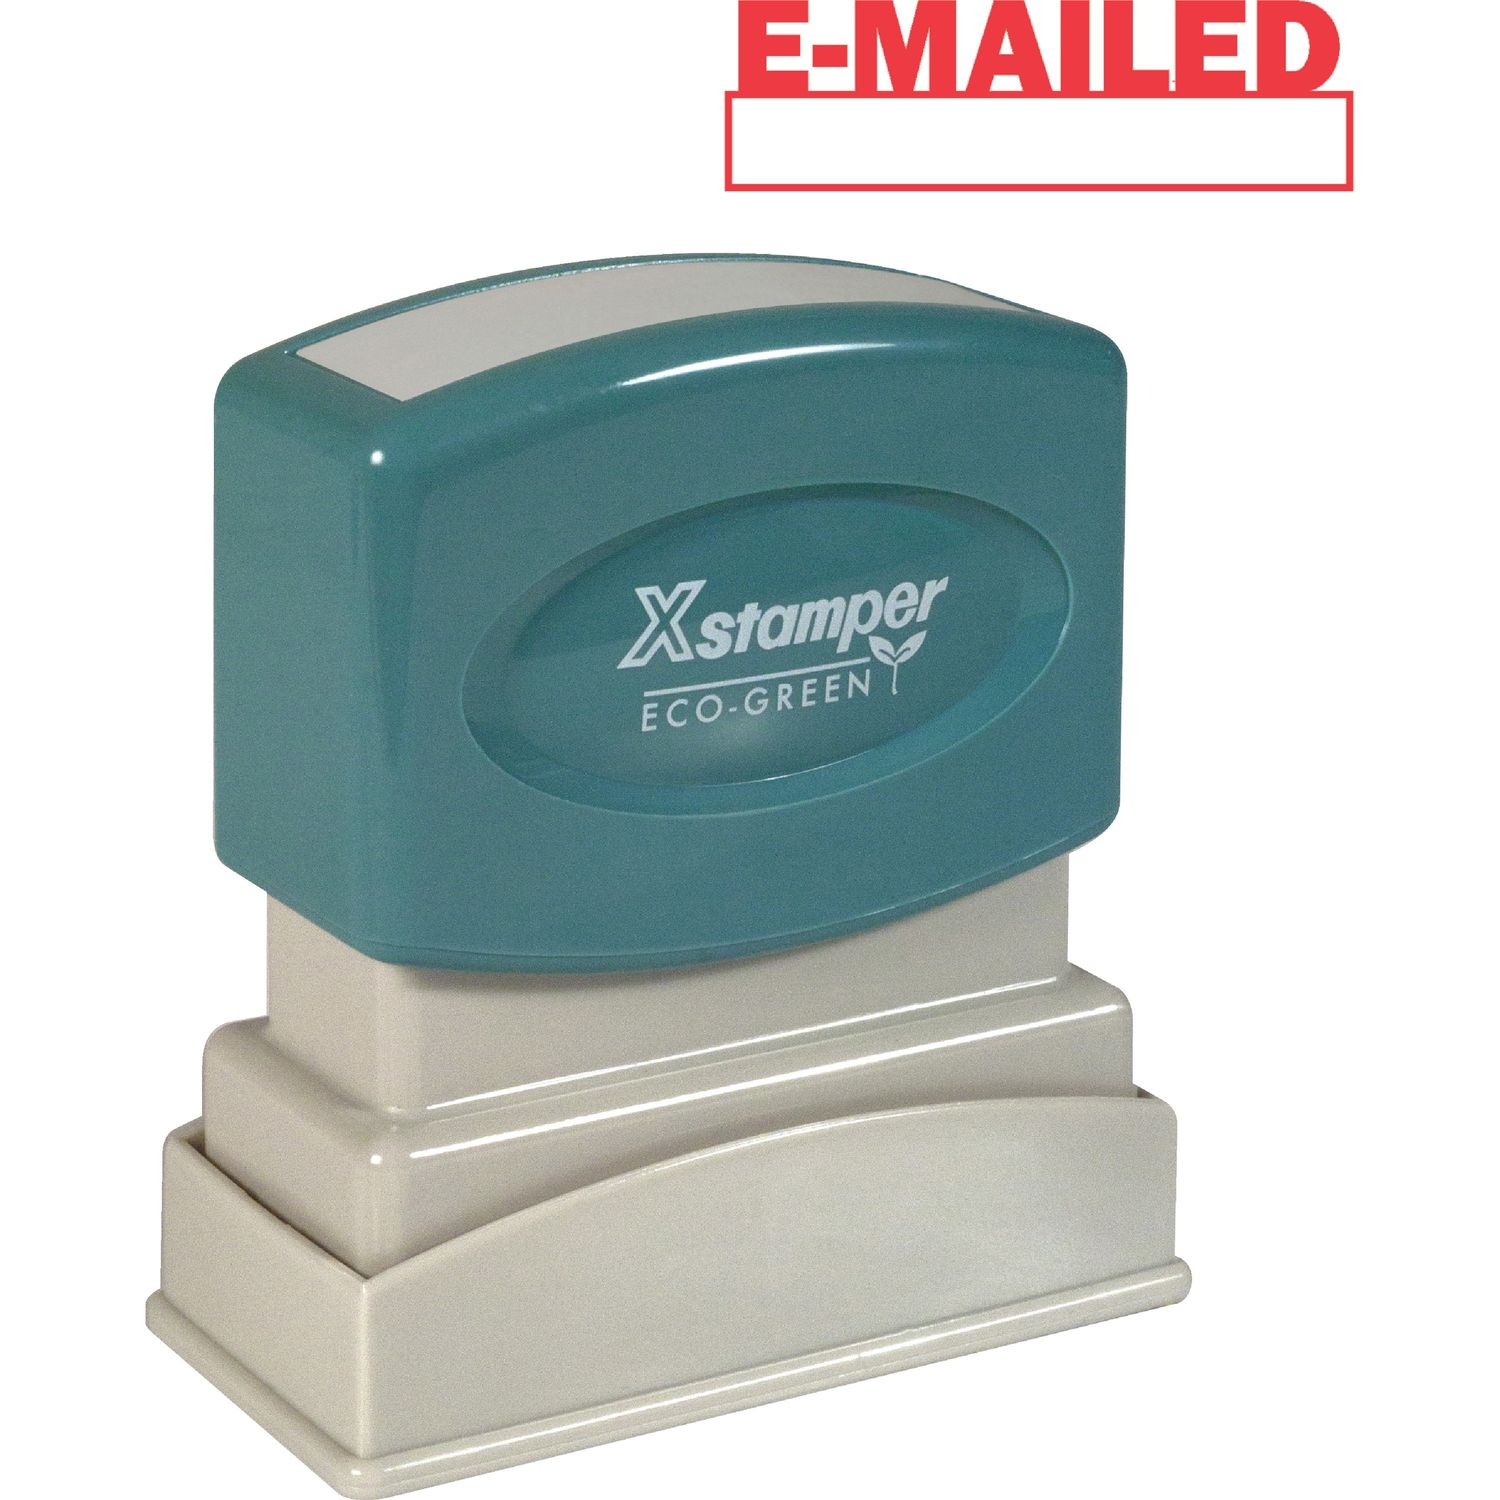 E-MAILED Window Title Stamp Message Stamp, "E-MAILED", 0.50" Impression Width x 1.62" Impression Length, 100000 Impression(s), Red, Recycled, 1 Each